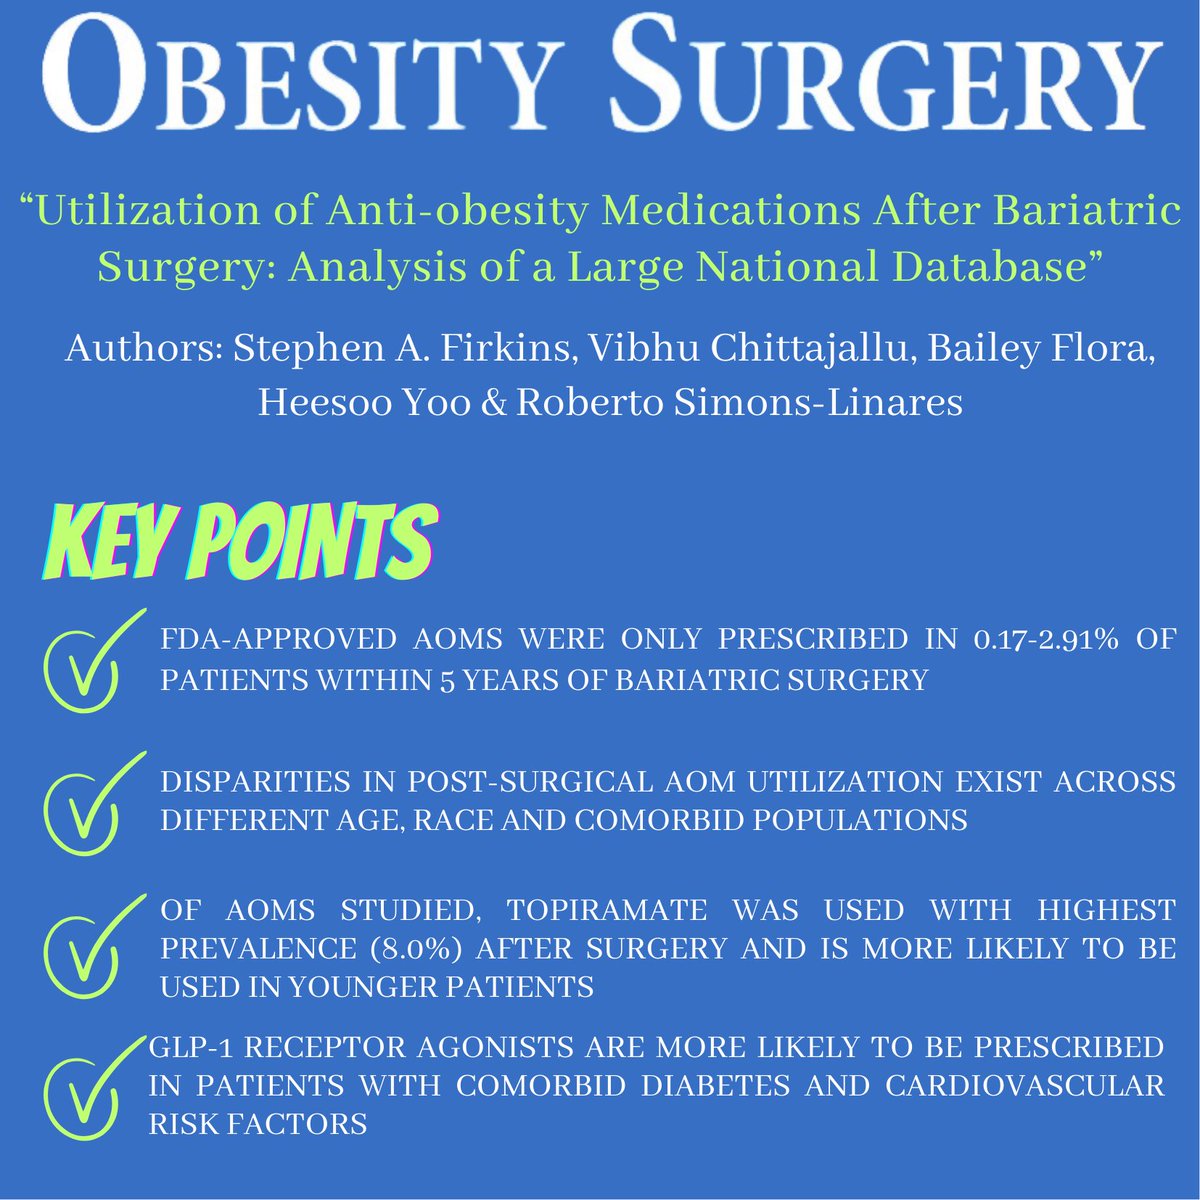 BEST PAPERS MAY ISSUE
'Utilization of Anti-obesity Medications After Bariatric Surgery: Analysis of a Large National Database'
DOI: doi.org/10.1007/s11695…
FREE DOWNLOAD: rdcu.be/dJerR